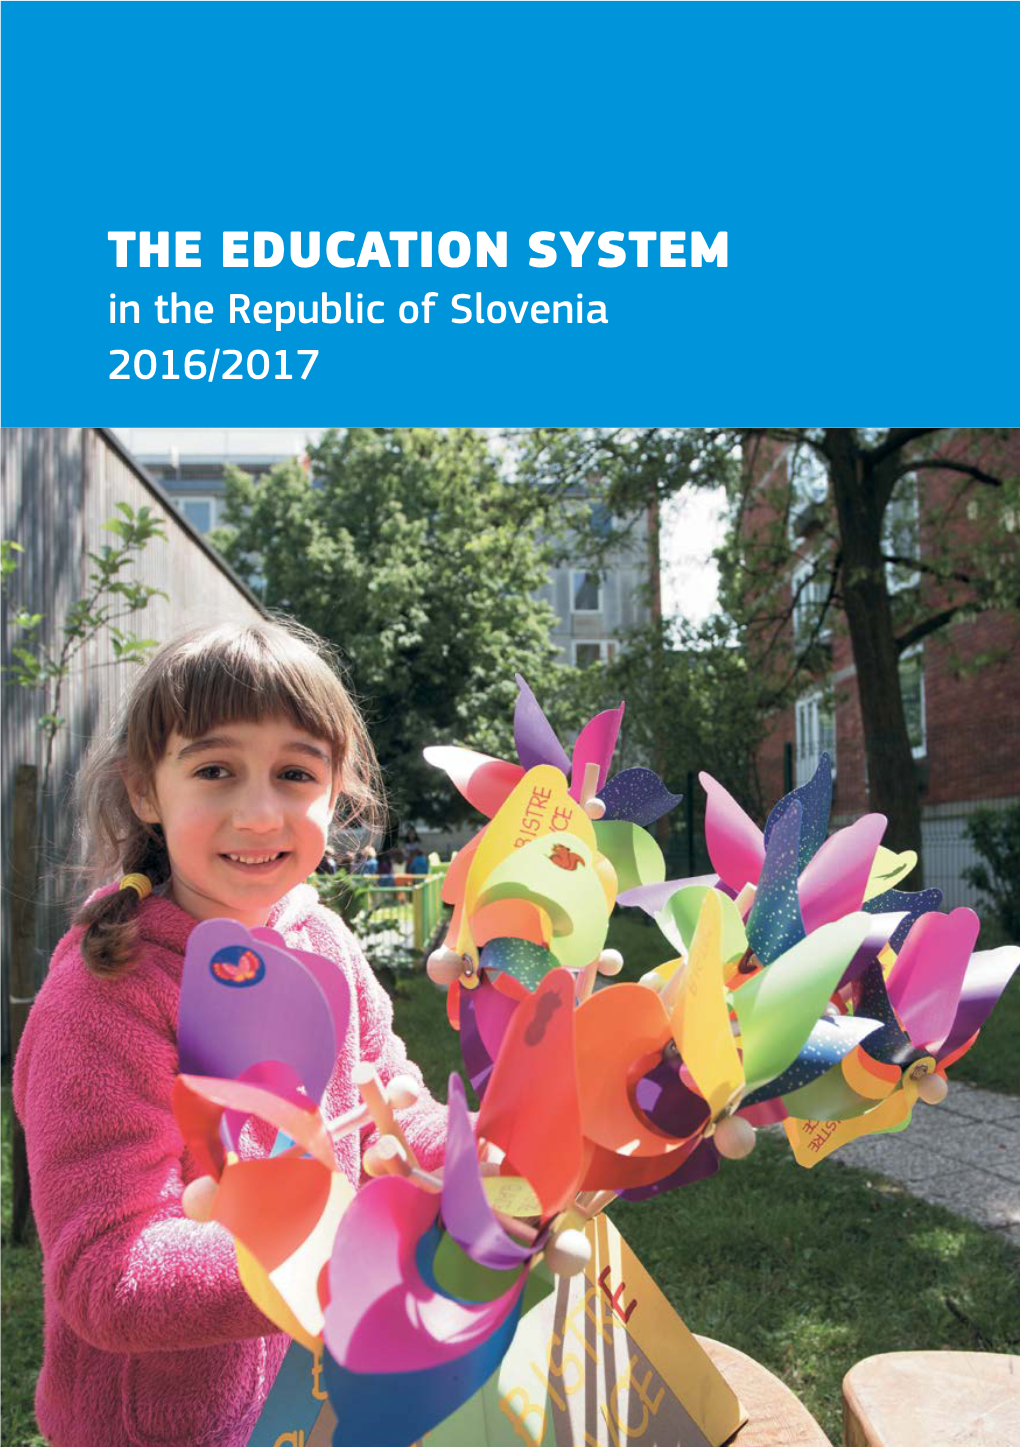 THE EDUCATION SYSTEM in the Republic of Slovenia 2016/2017